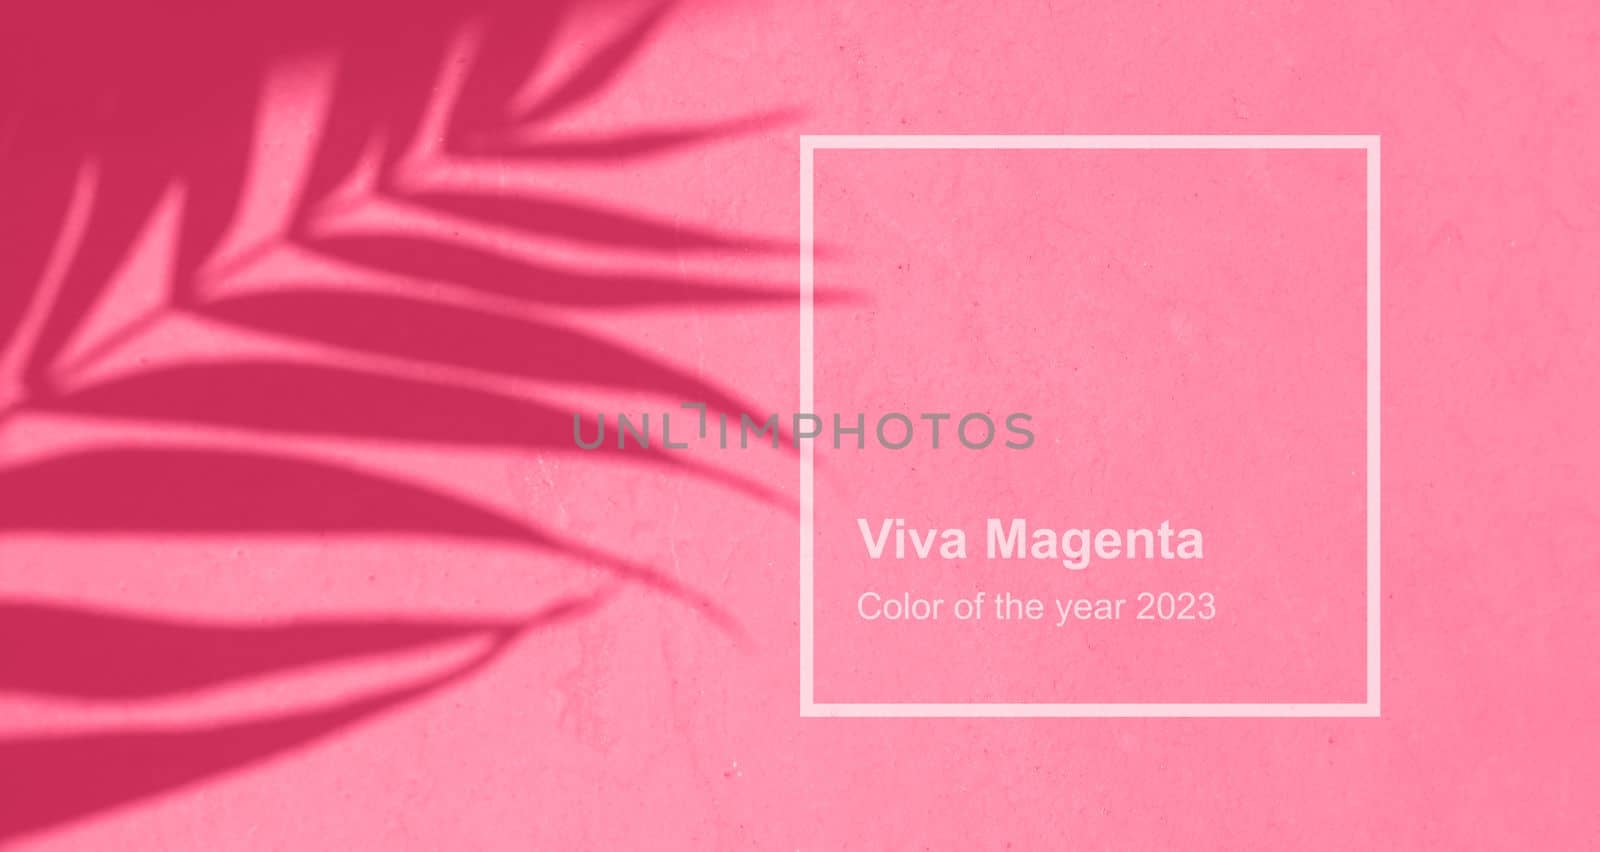 Shadow leaf dypsis on Viva Magenta color wall. Viva Magenta Pantone color of the year 2023. Monochrome background. High quality photo